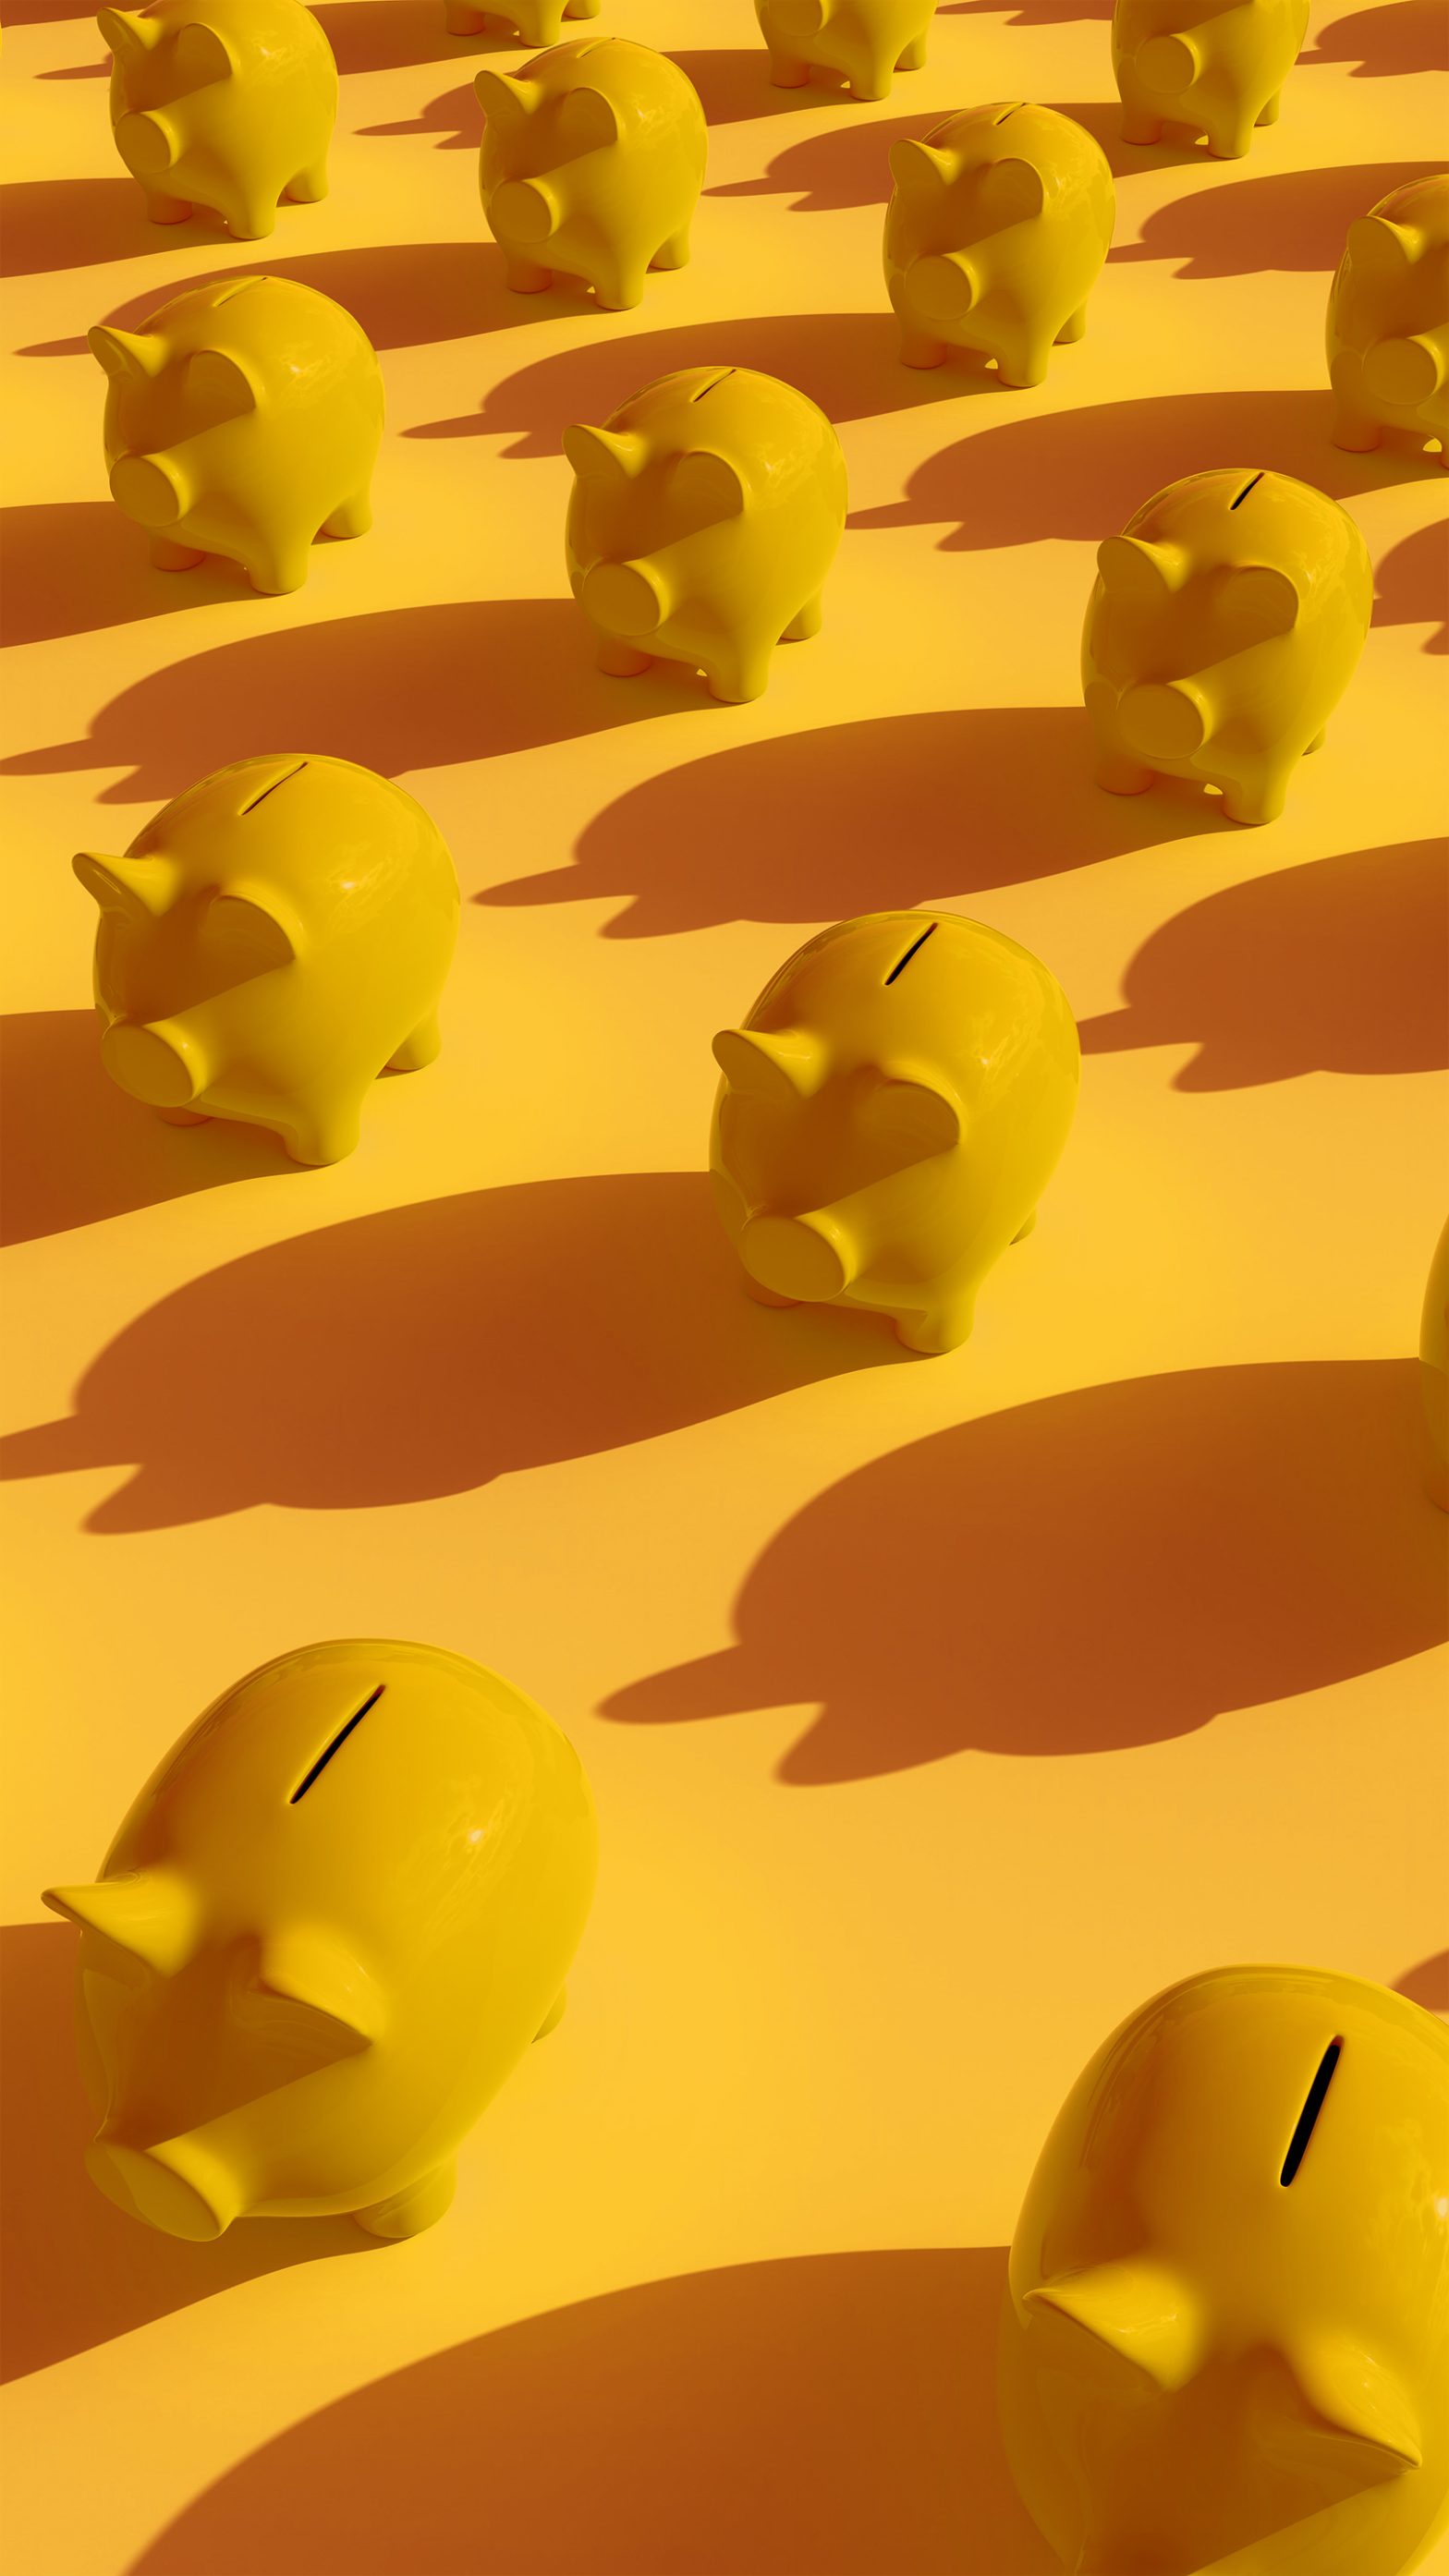 Rows of bright yellow piggy banks.